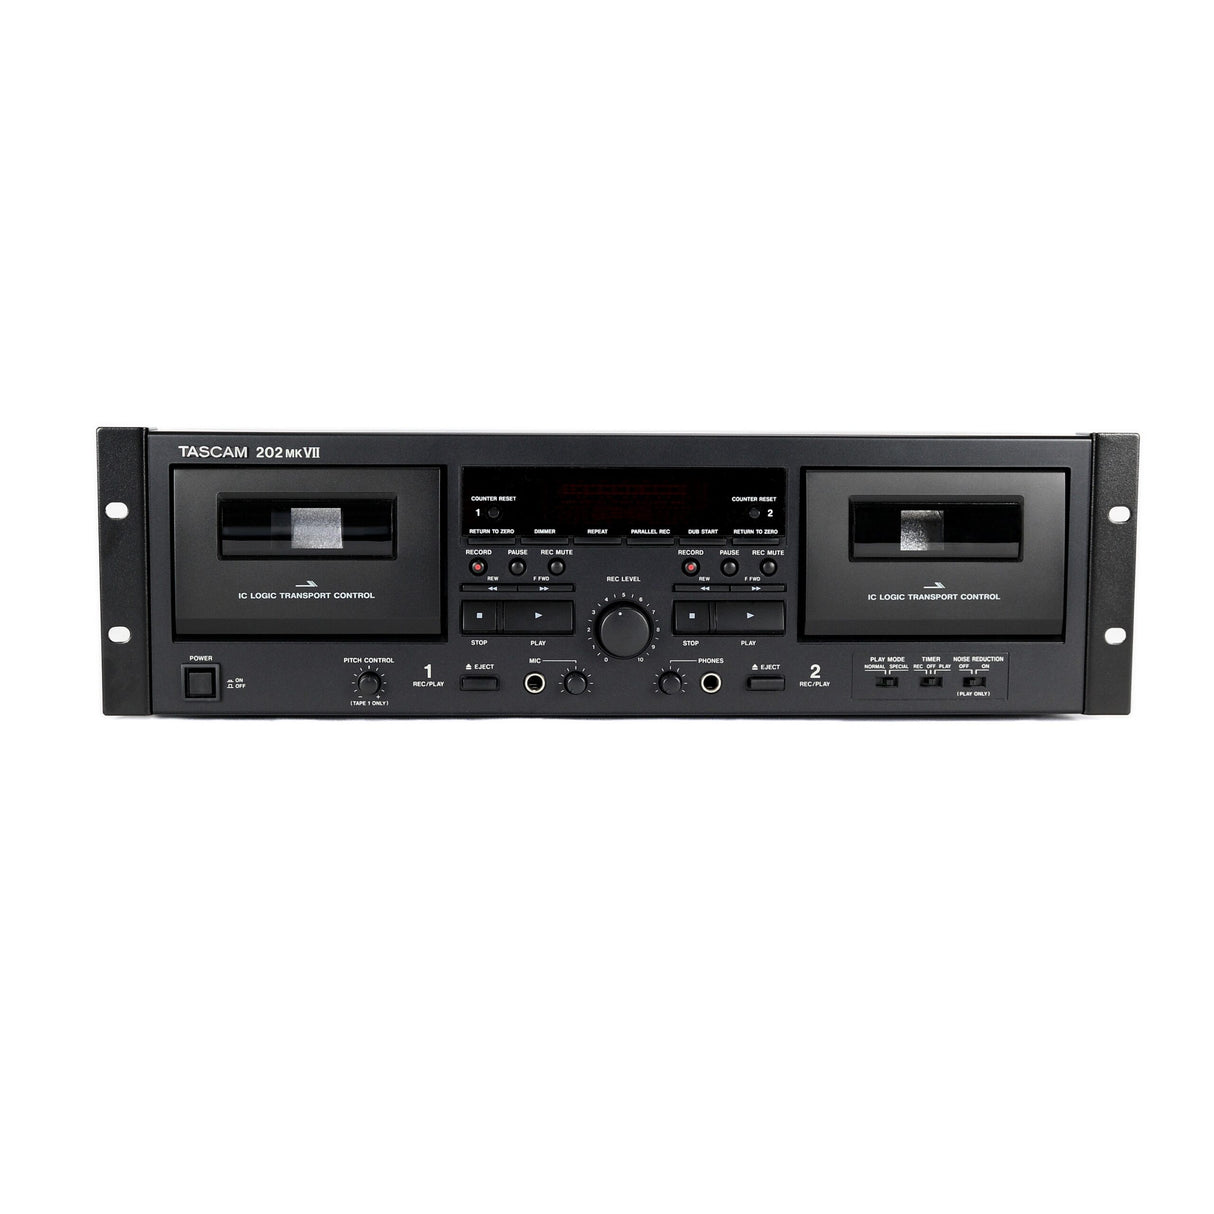 Tascam 202mkVII Double Cassette Deck with USB Port